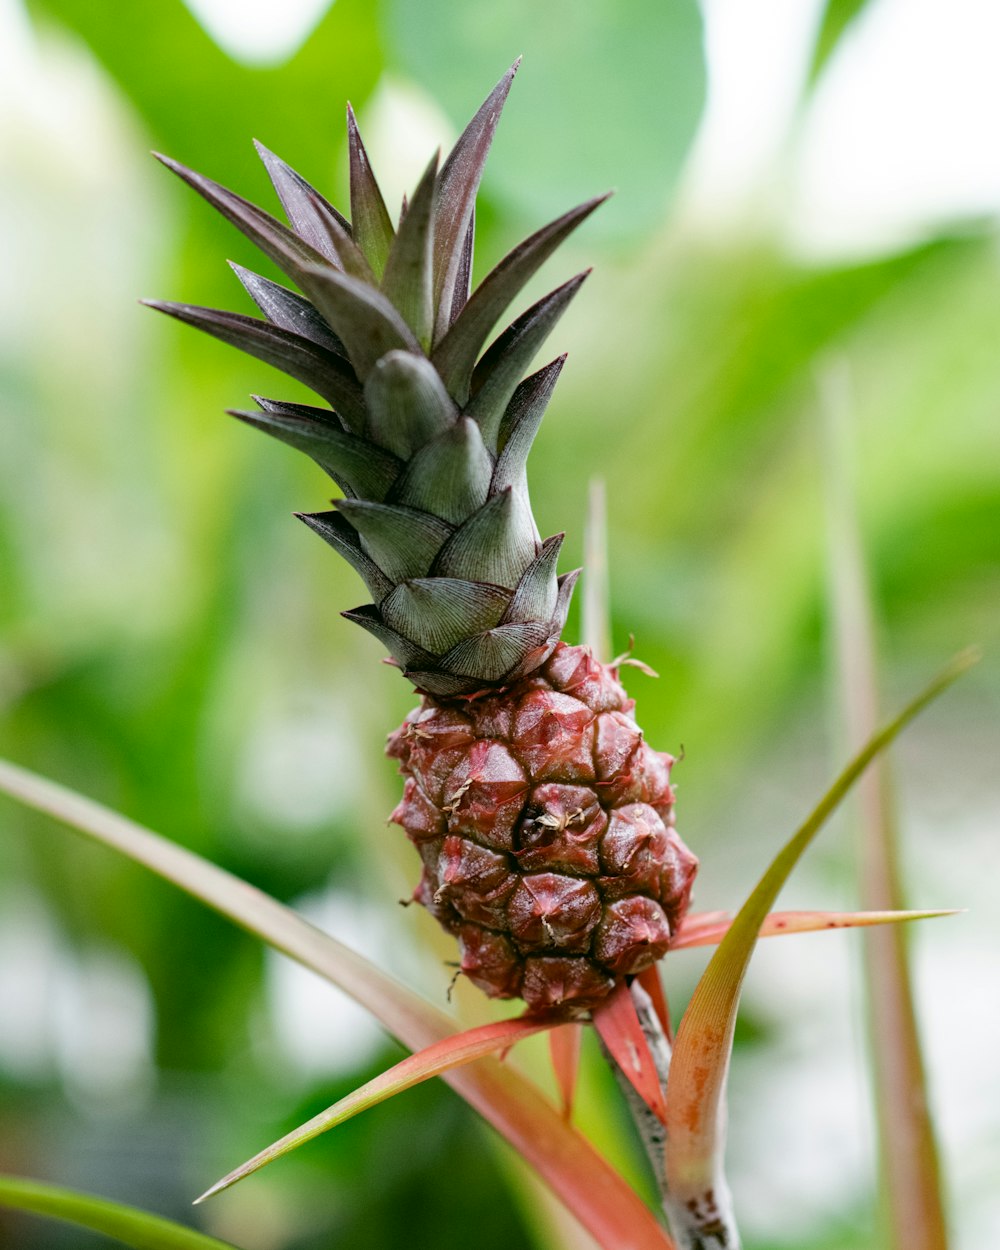 green and brown pineapple in close up photography